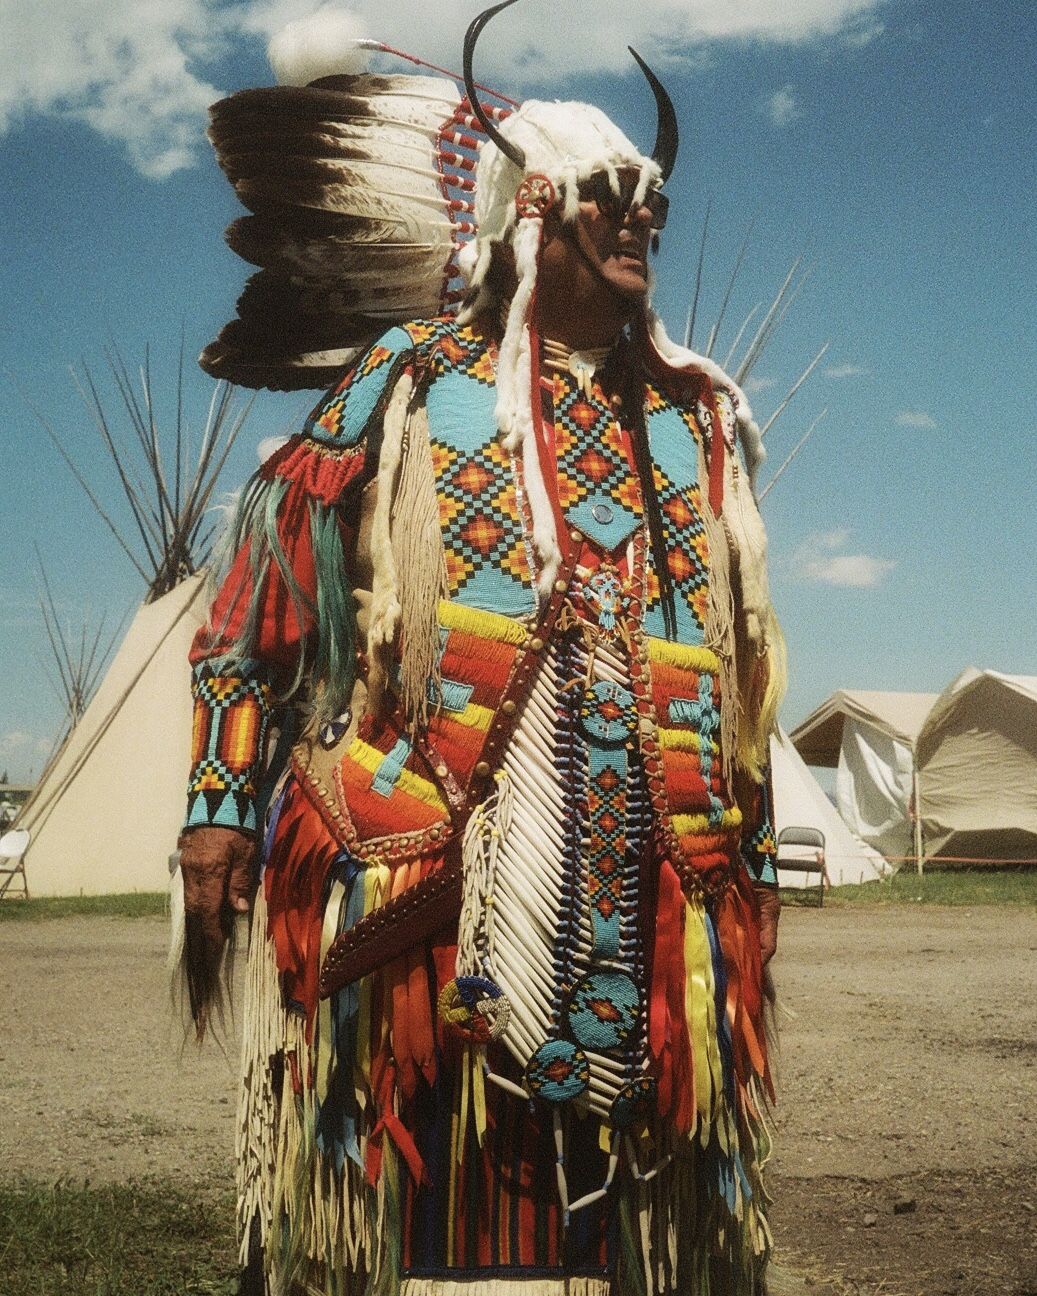 a man stands in traditional attire, adorned with horns, feathers and colorful fabrics and ribbons.